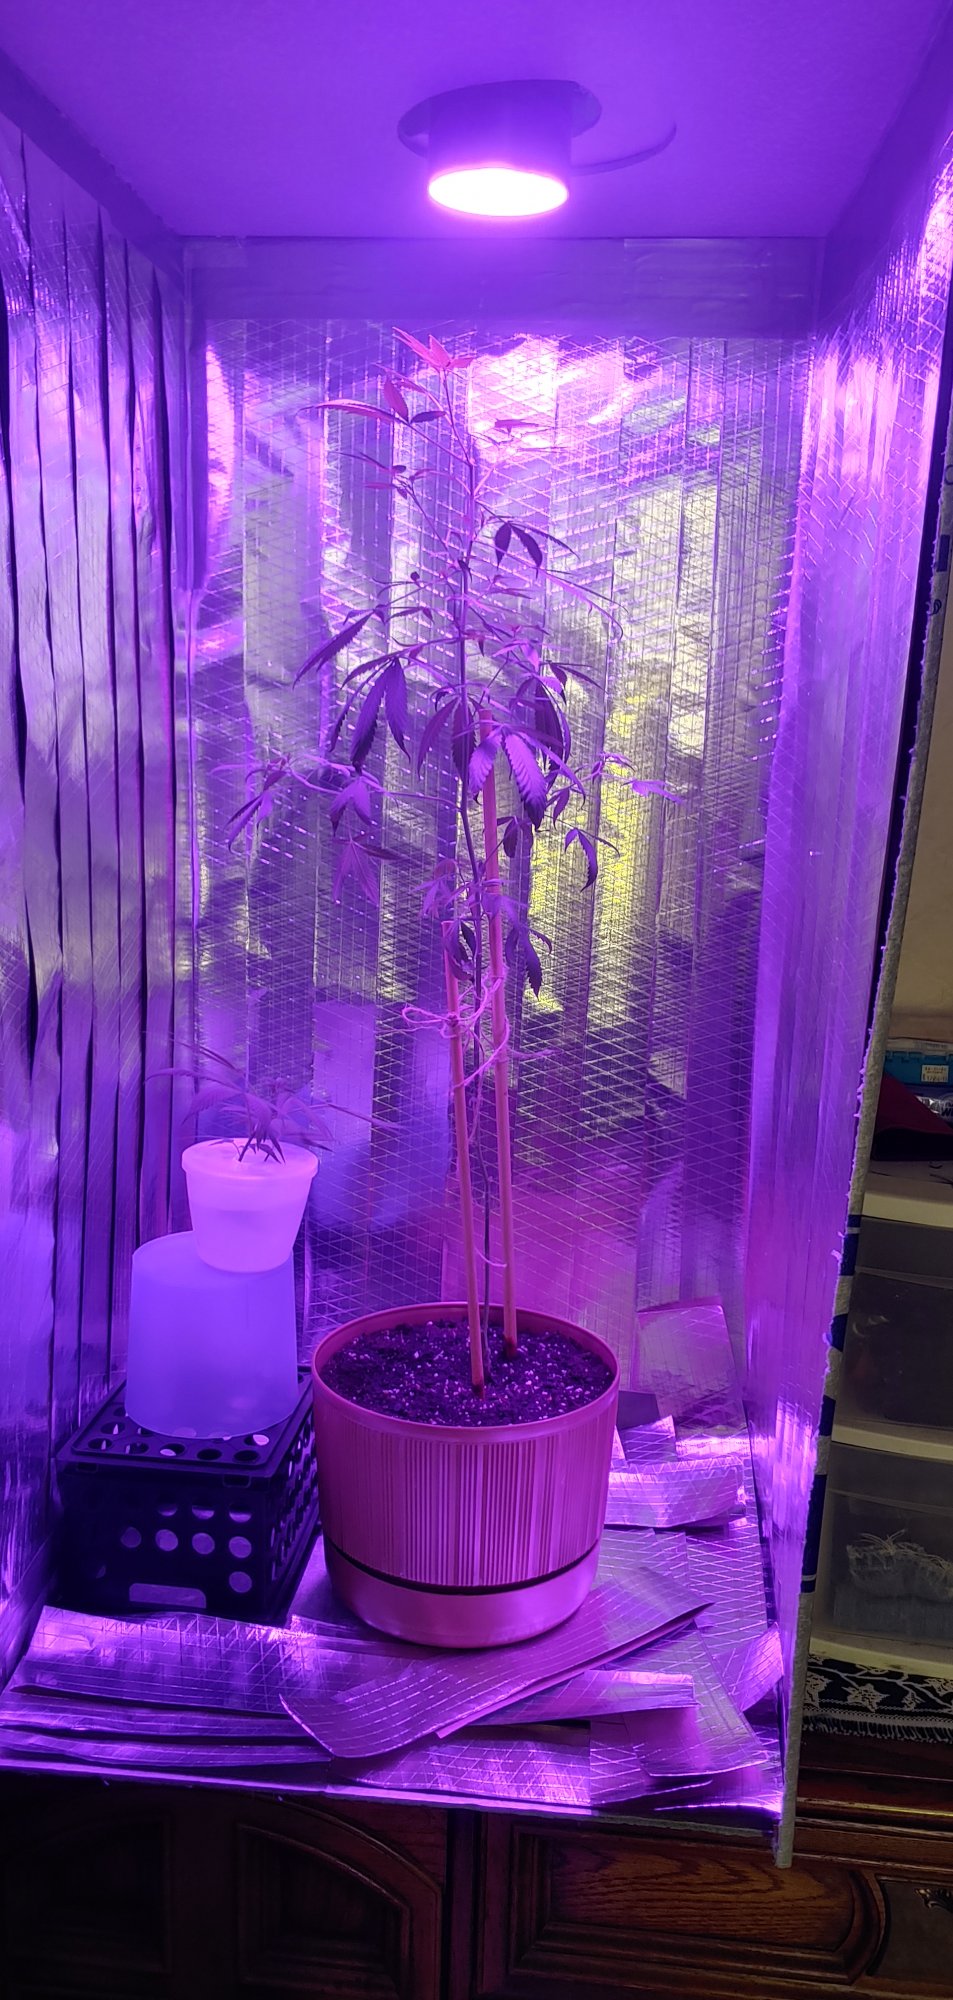 New here and new to growing 3